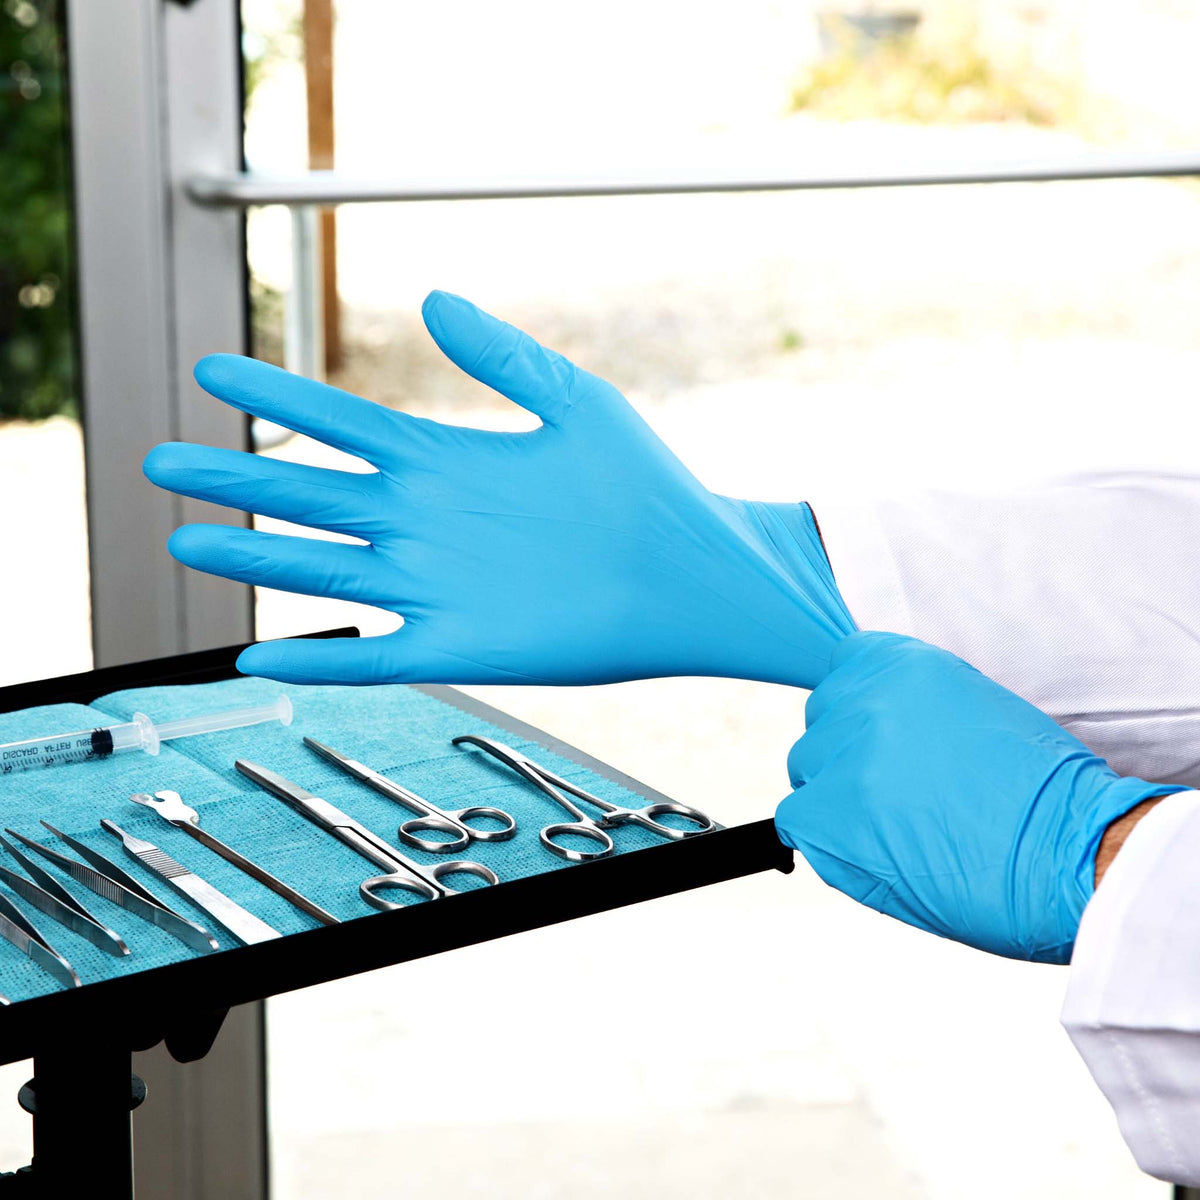 a health personnel donning a pair of blue nitrile gloves in preparation for a medical examination